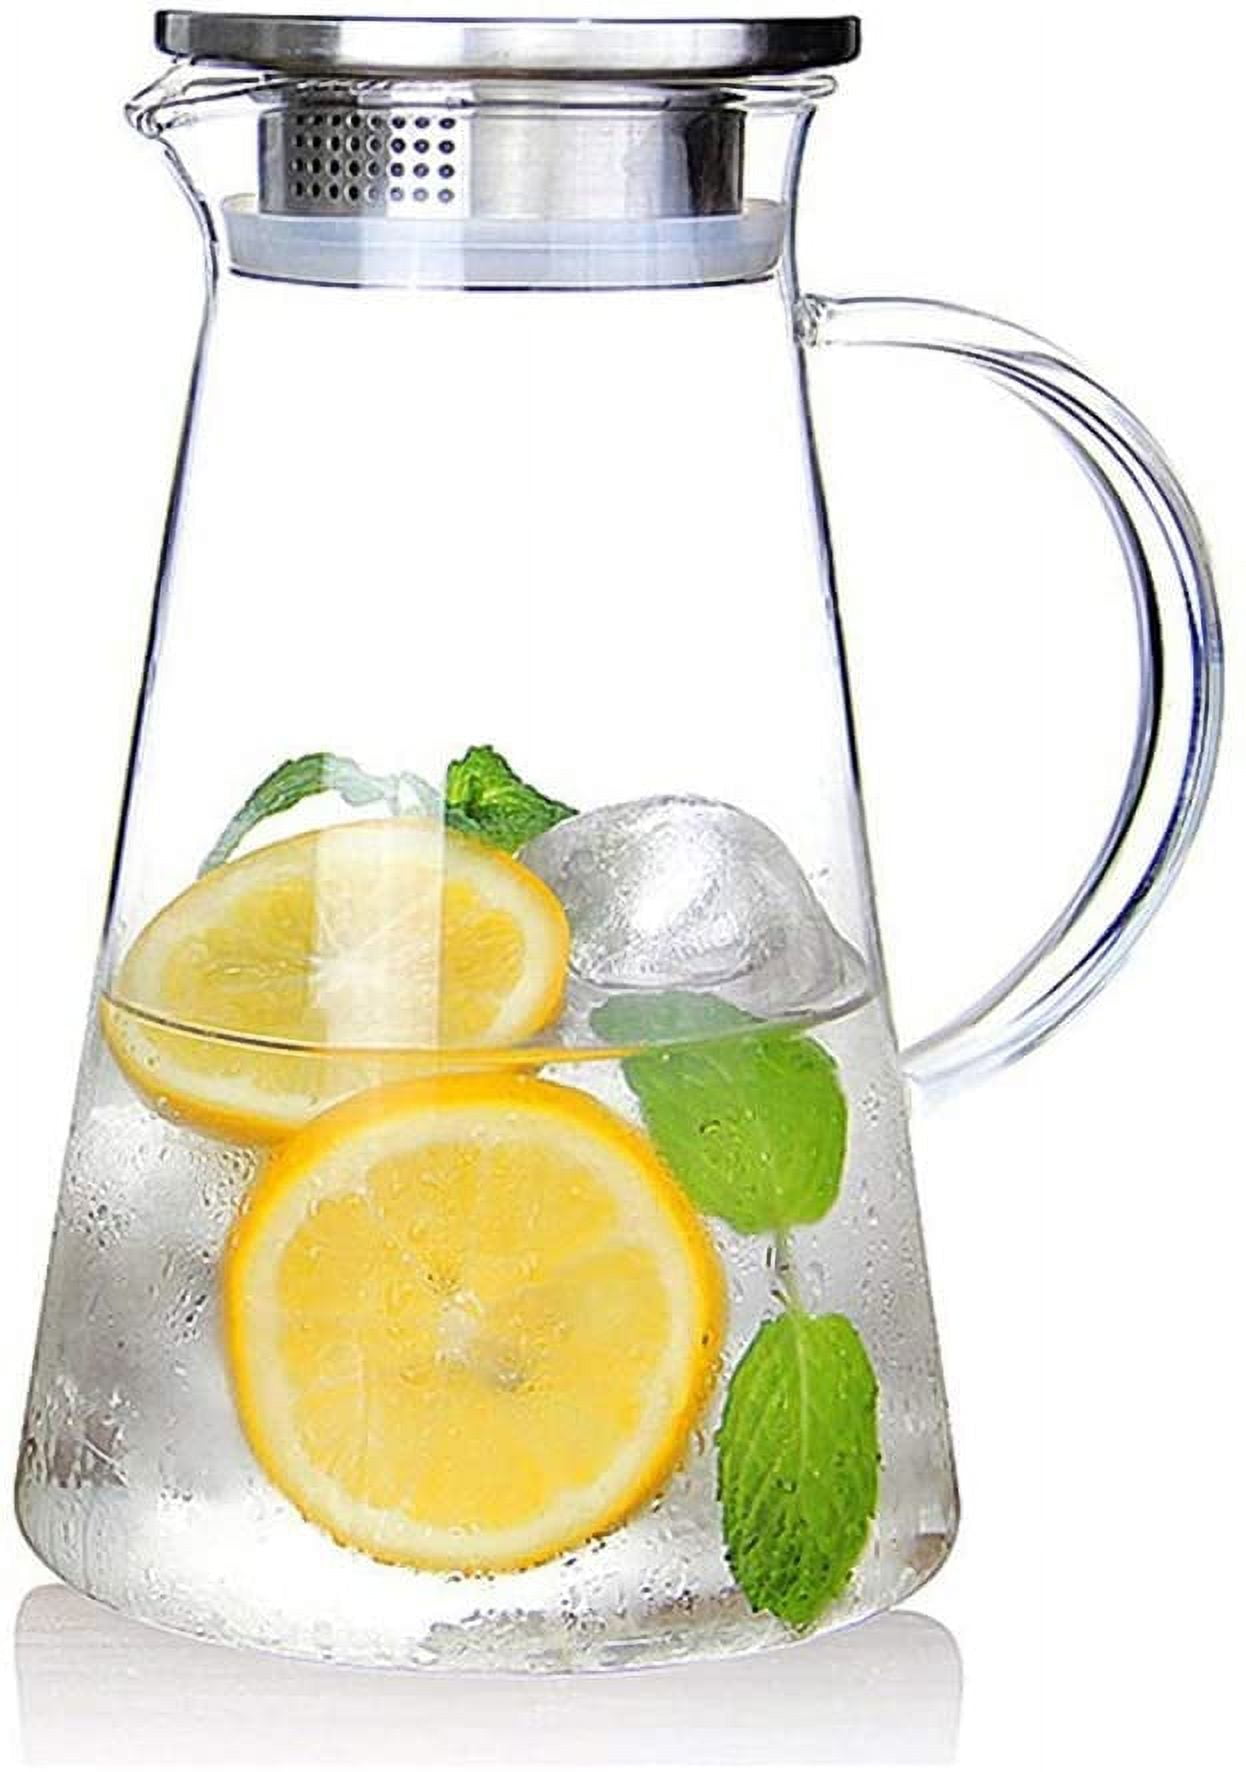 JCPKitchen Borosilicate Glass Pitcher with Lid and Spout - 68 Ounces Cold and Hot Water Carafe with Unique Diamond Pattern, Beverage Pitcher for